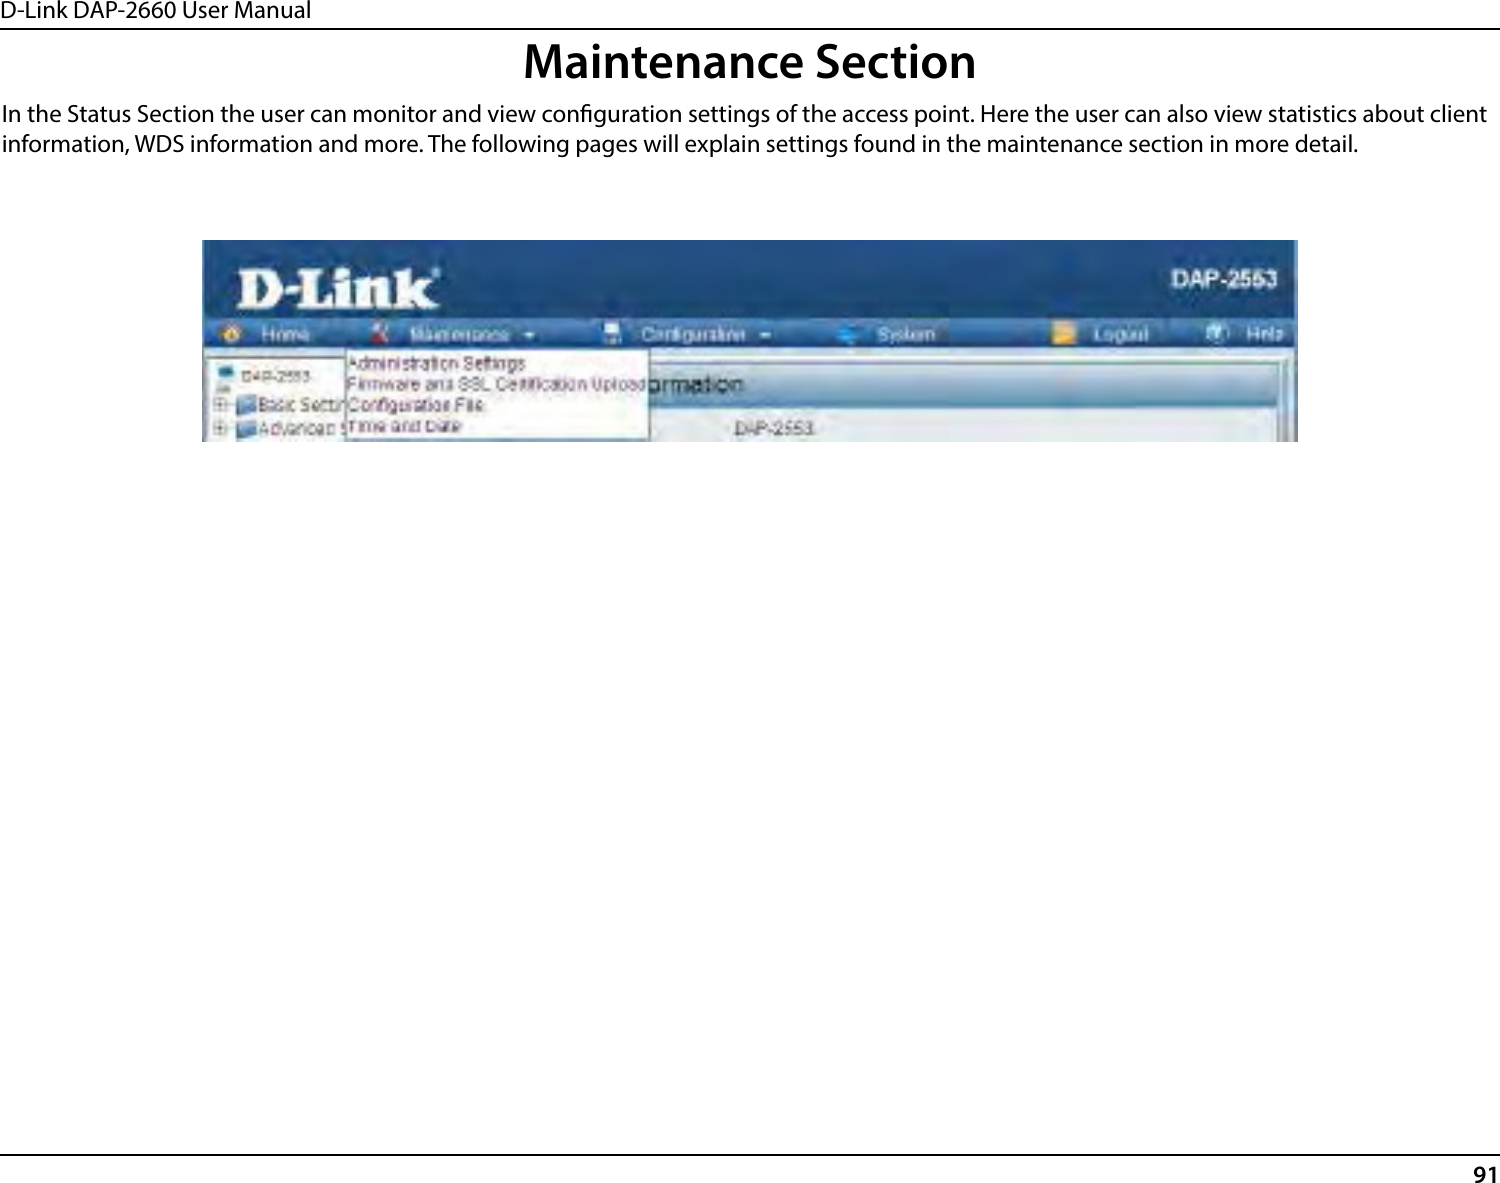 D-Link DAP-2660 User Manual91Maintenance SectionIn the Status Section the user can monitor and view conguration settings of the access point. Here the user can also view statistics about client information, WDS information and more. The following pages will explain settings found in the maintenance section in more detail.